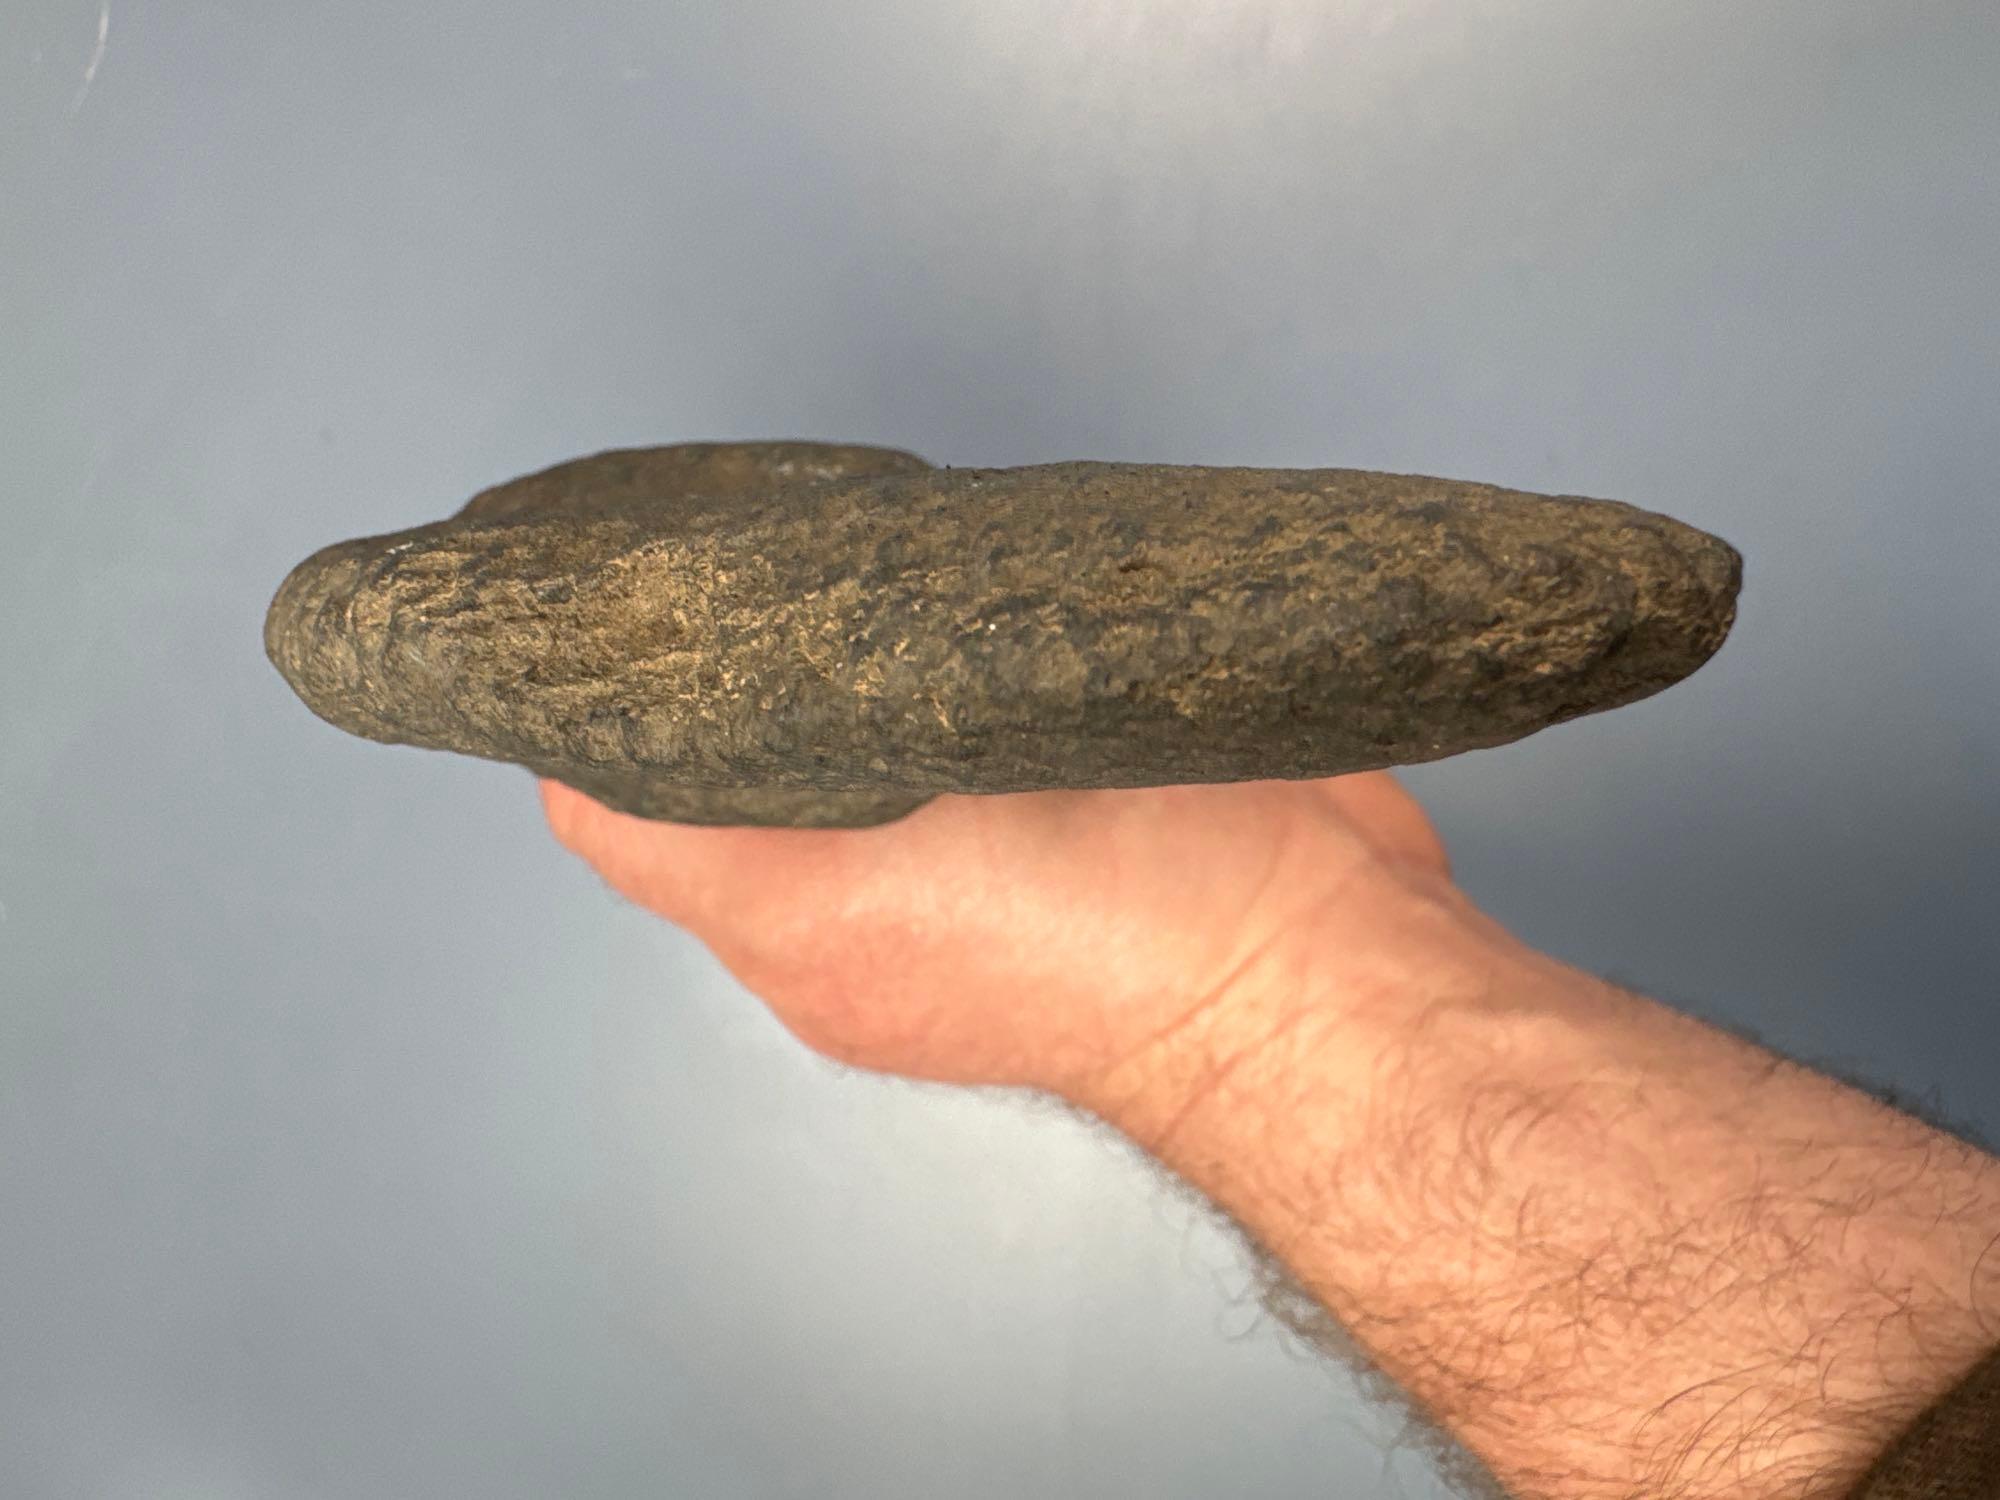 HUGE 7 3/8" Peach Bottom Slate Bannerstone Preform, Ex: Dorothy Middleton Collection, Reported found